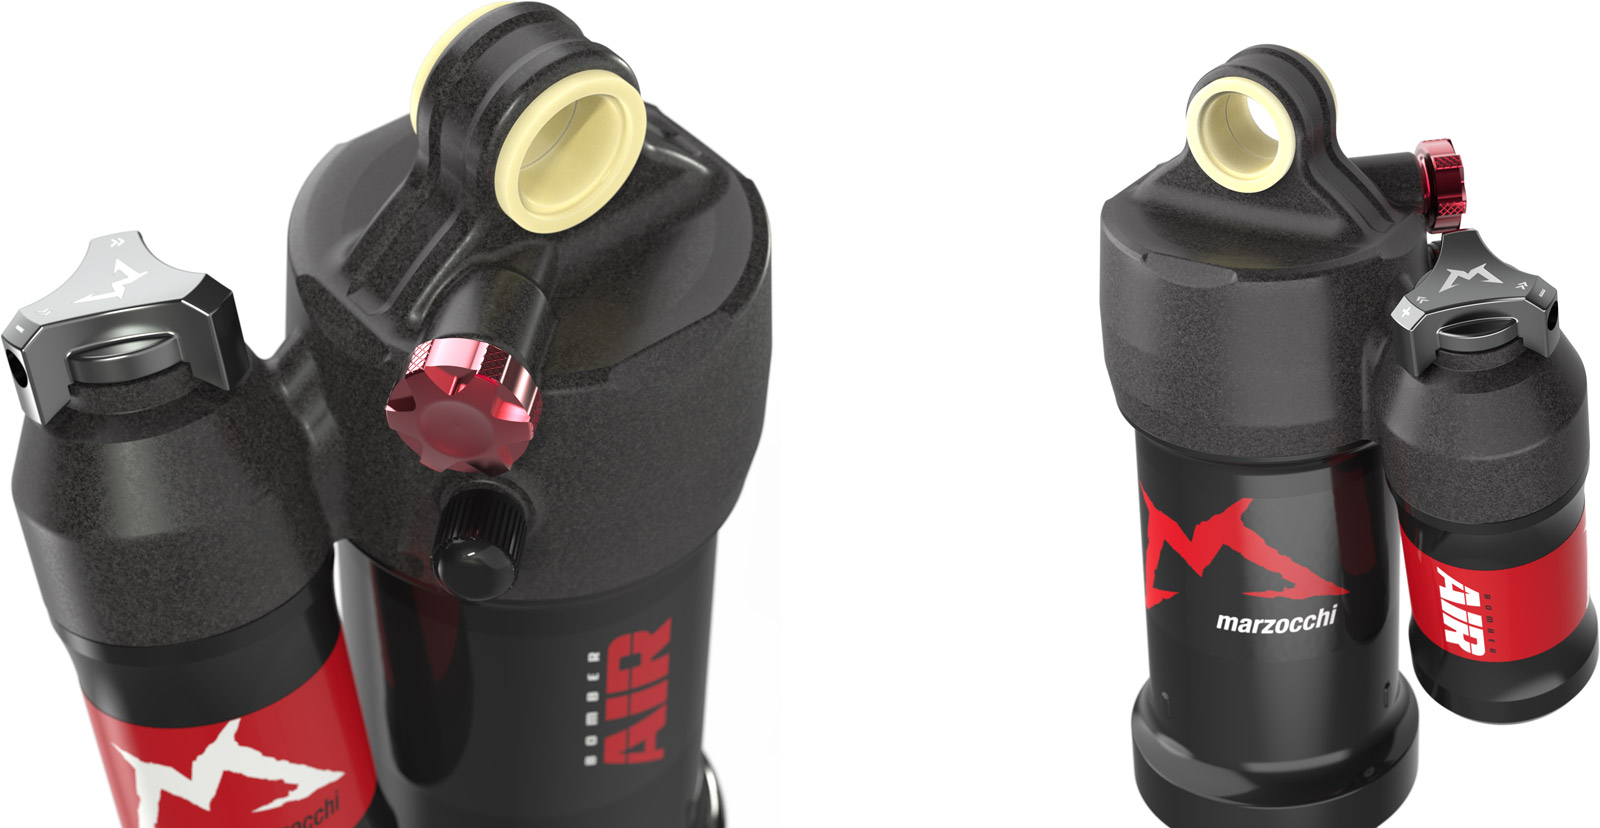 marzocchi bomber air shock dials tuneable sweep adjust compression damping